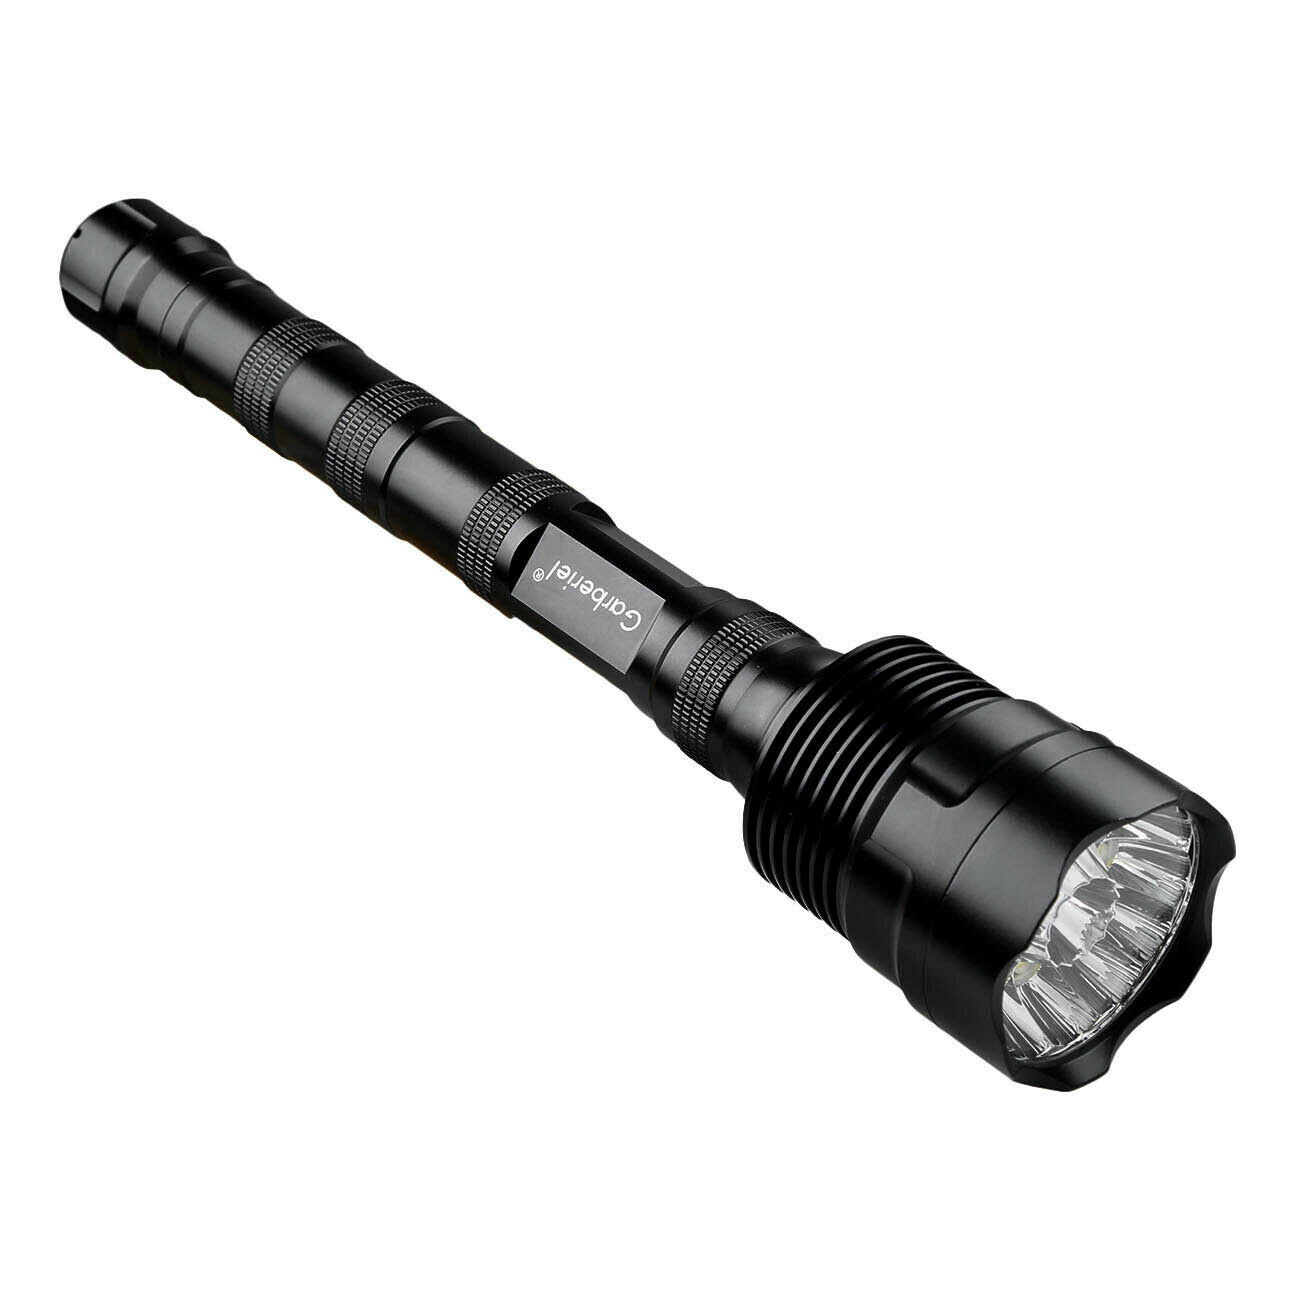 Super Bright 99000lm Tactical 14 x T6 5Modes LED 18650 Flashlight Hunting Torch